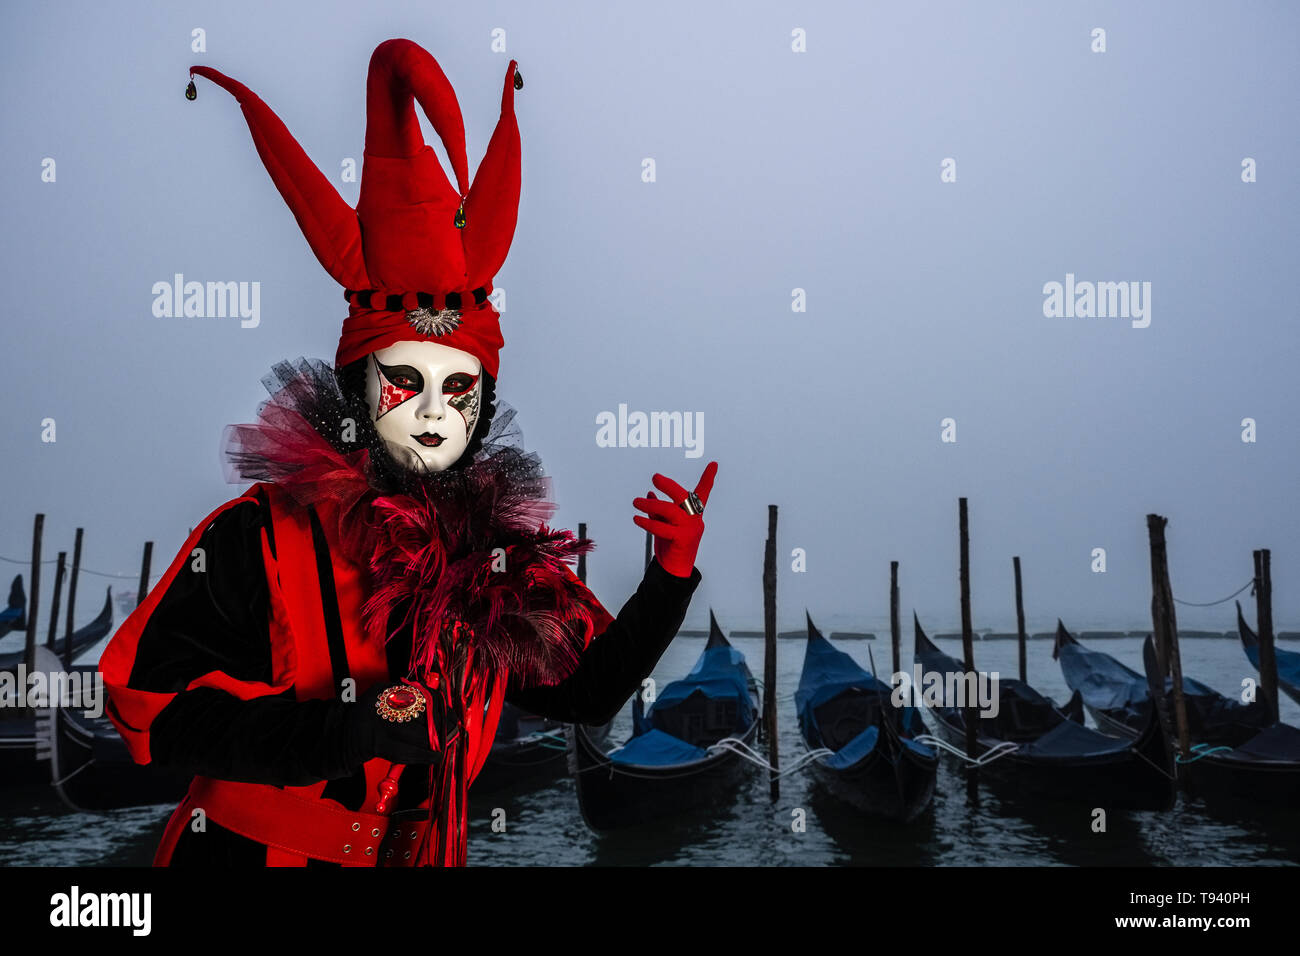 Portrait of a feminin masked person in a beautiful creative harlequin costume, posing at Grand Canal, Canal Grande, celebrating the Venetian Carnival Stock Photo